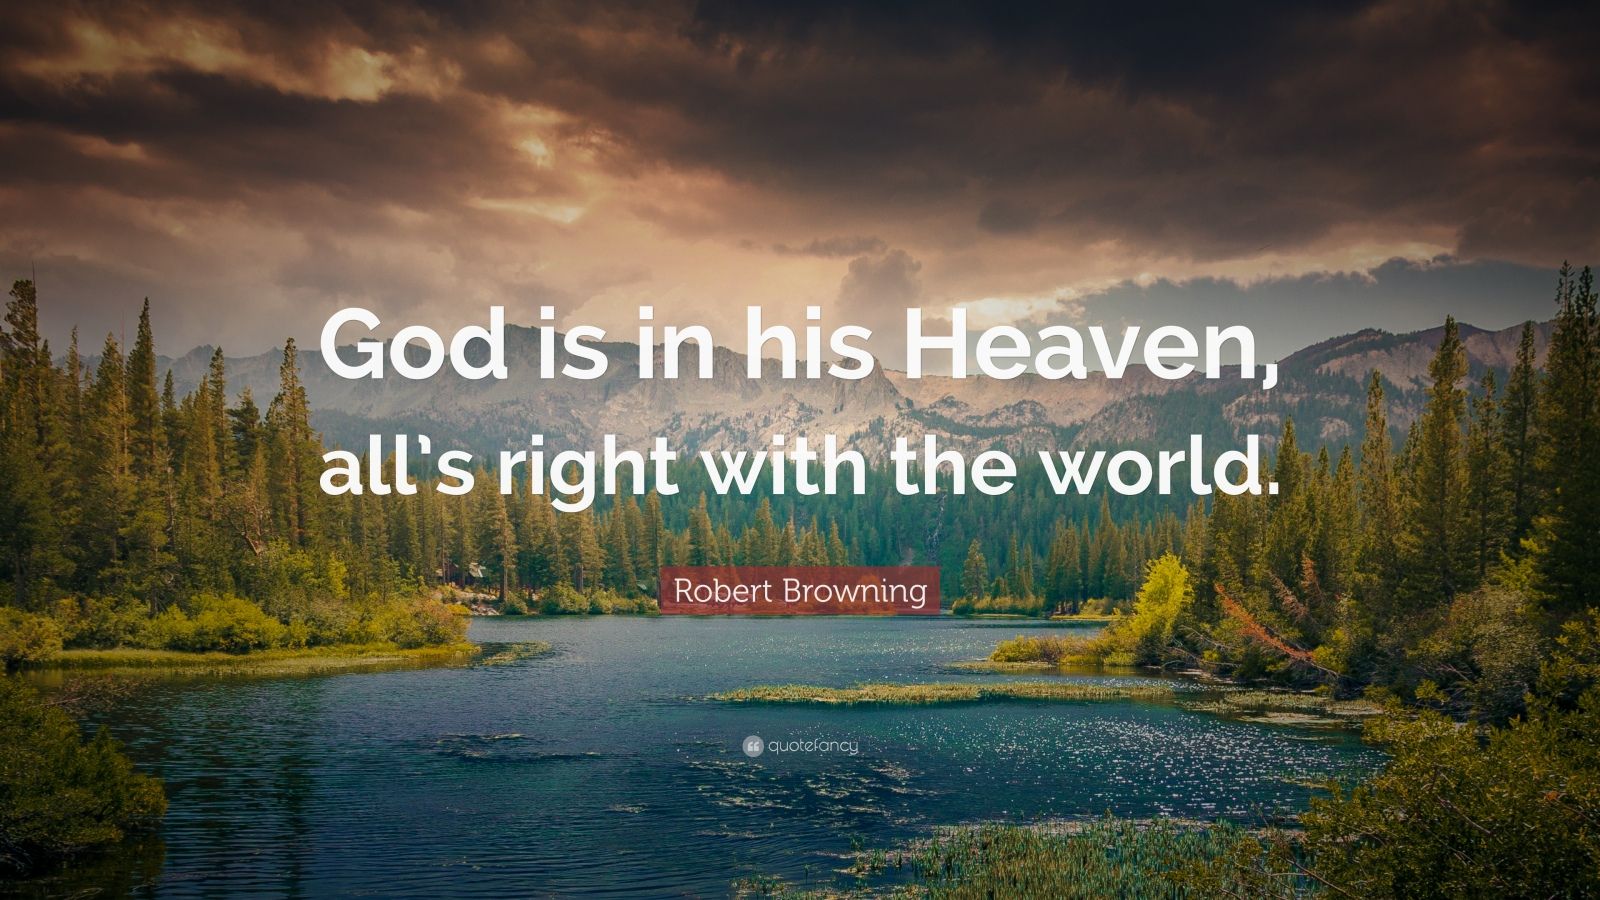 Robert Browning Quote: “God is in his Heaven, all’s right with the world.”